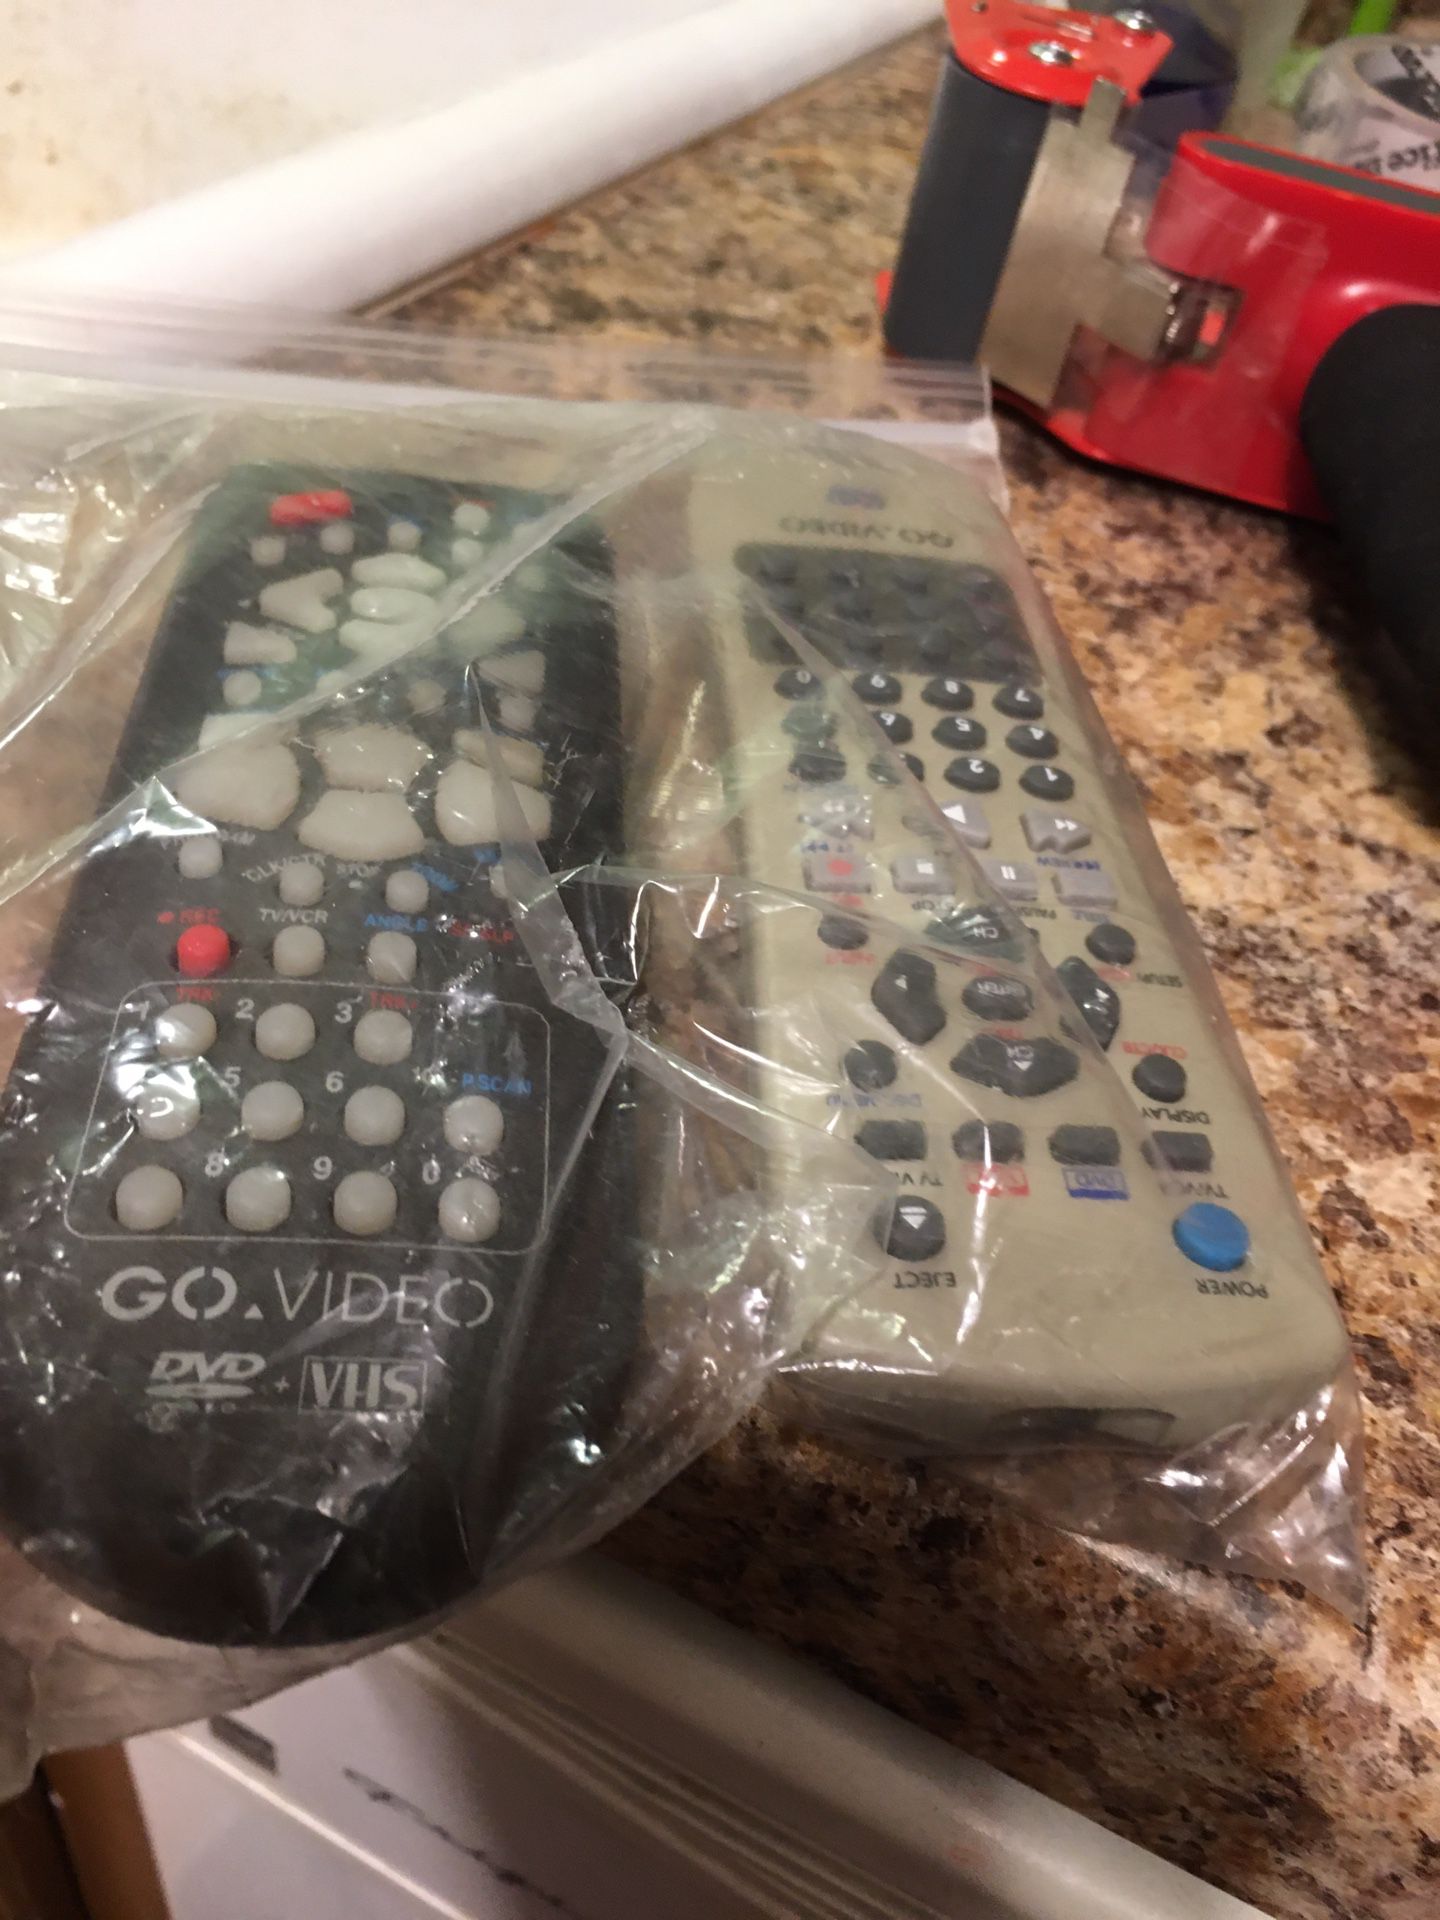 go video remote control package